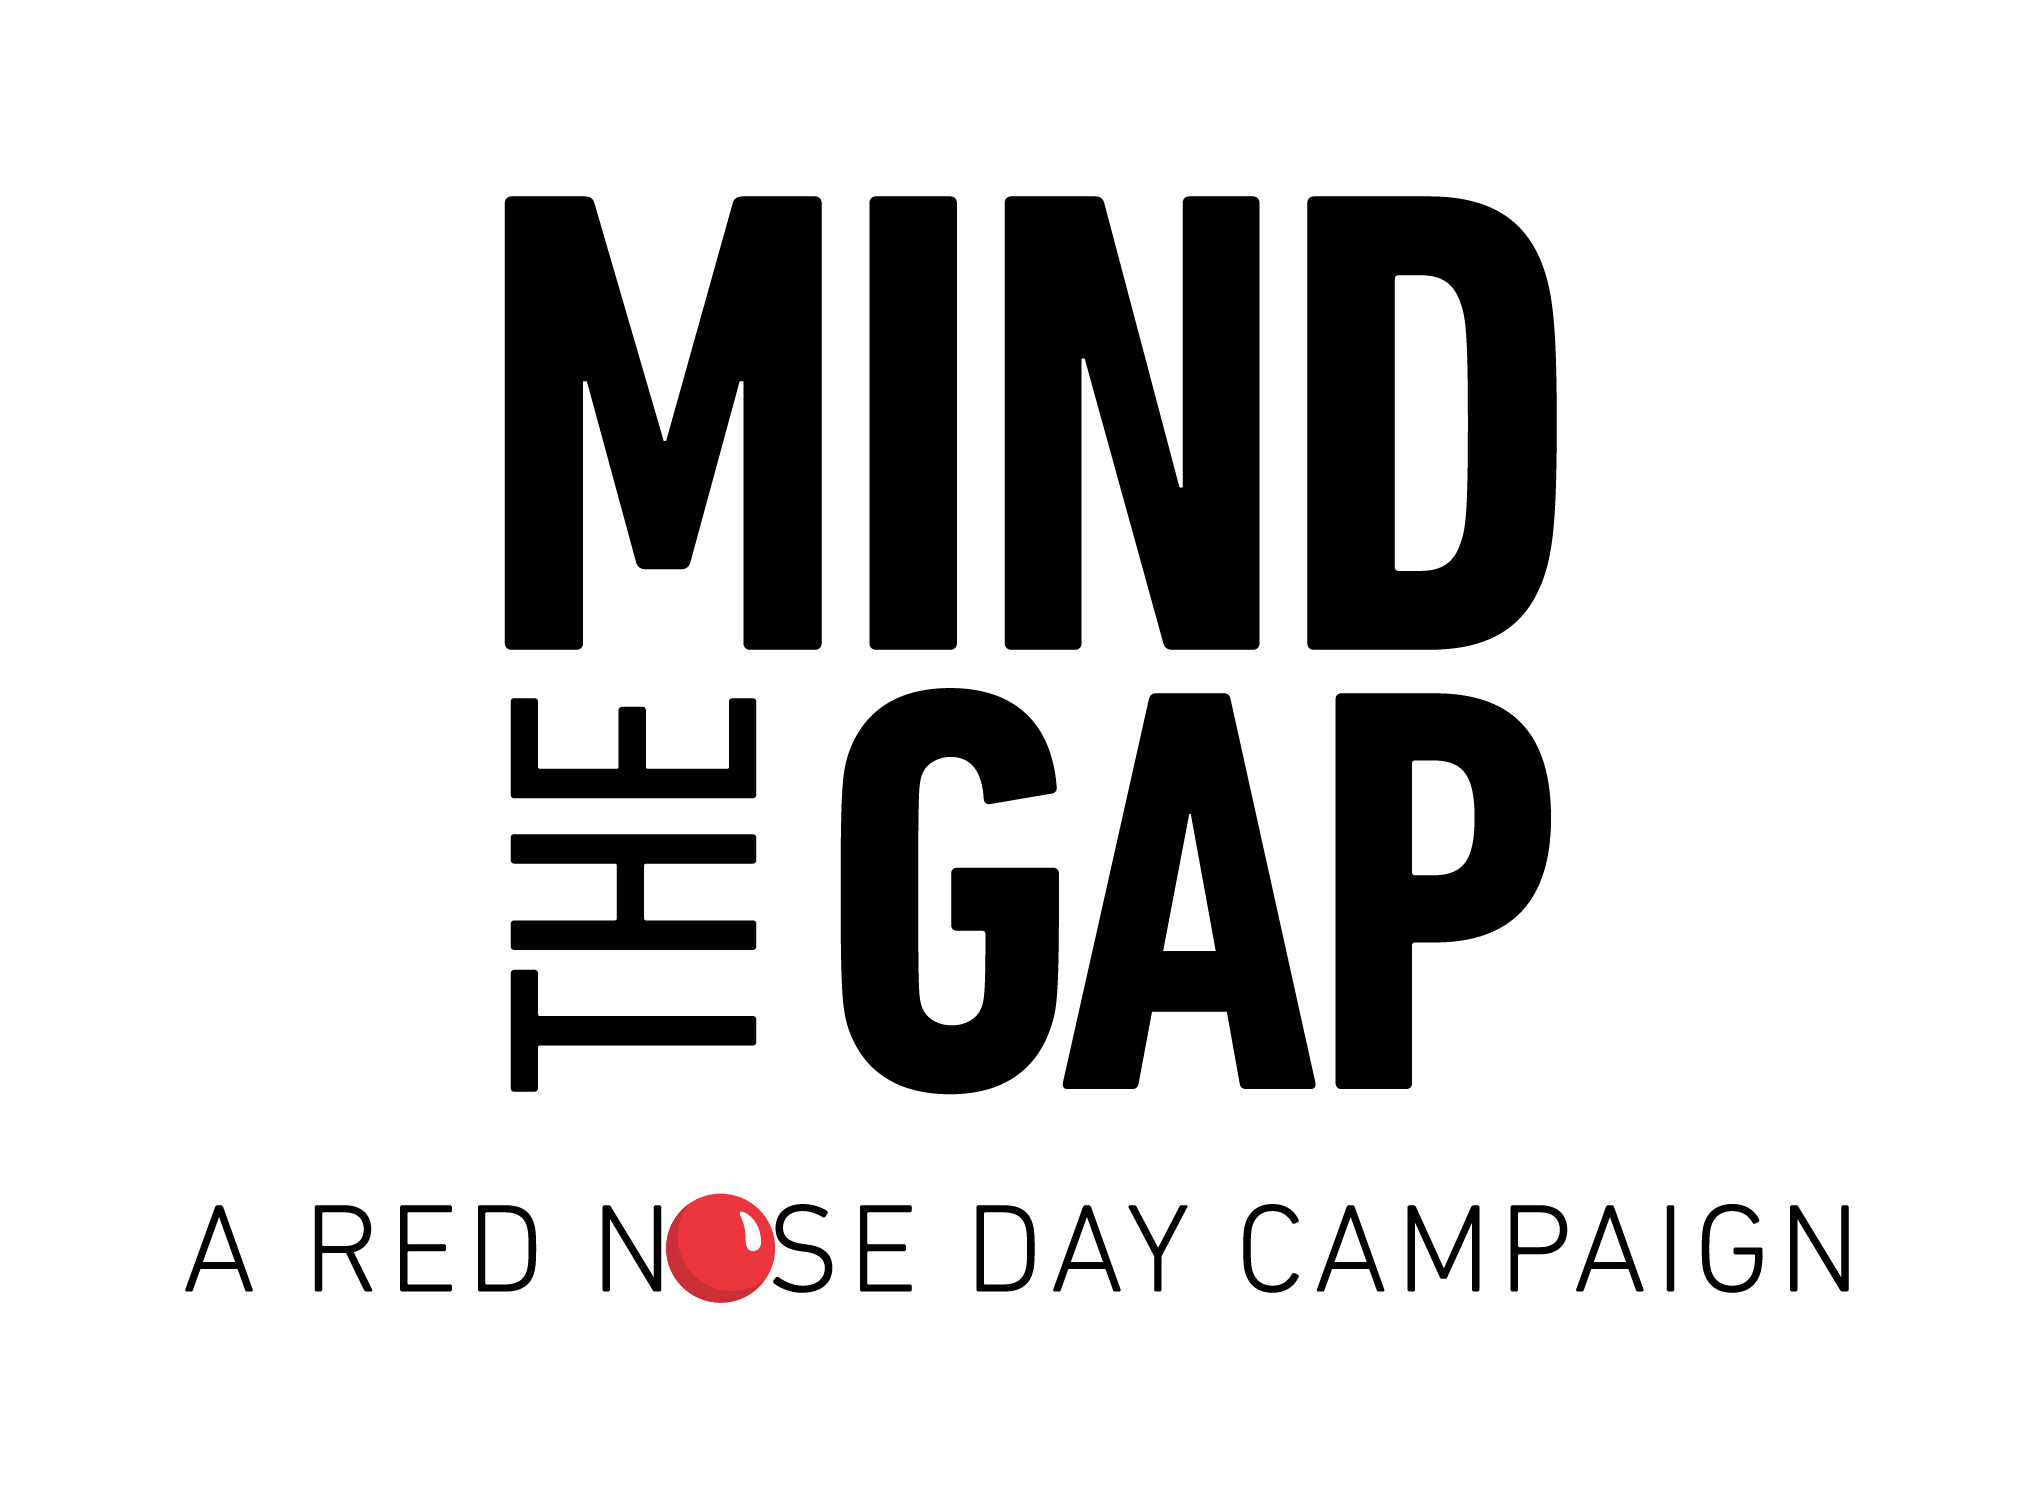 Red Nose Day’s "Mind the Gap" back-to-school fundraiser highlights the learning gap affecting low-income students — which has been made worse by the COVID-19 crisis.